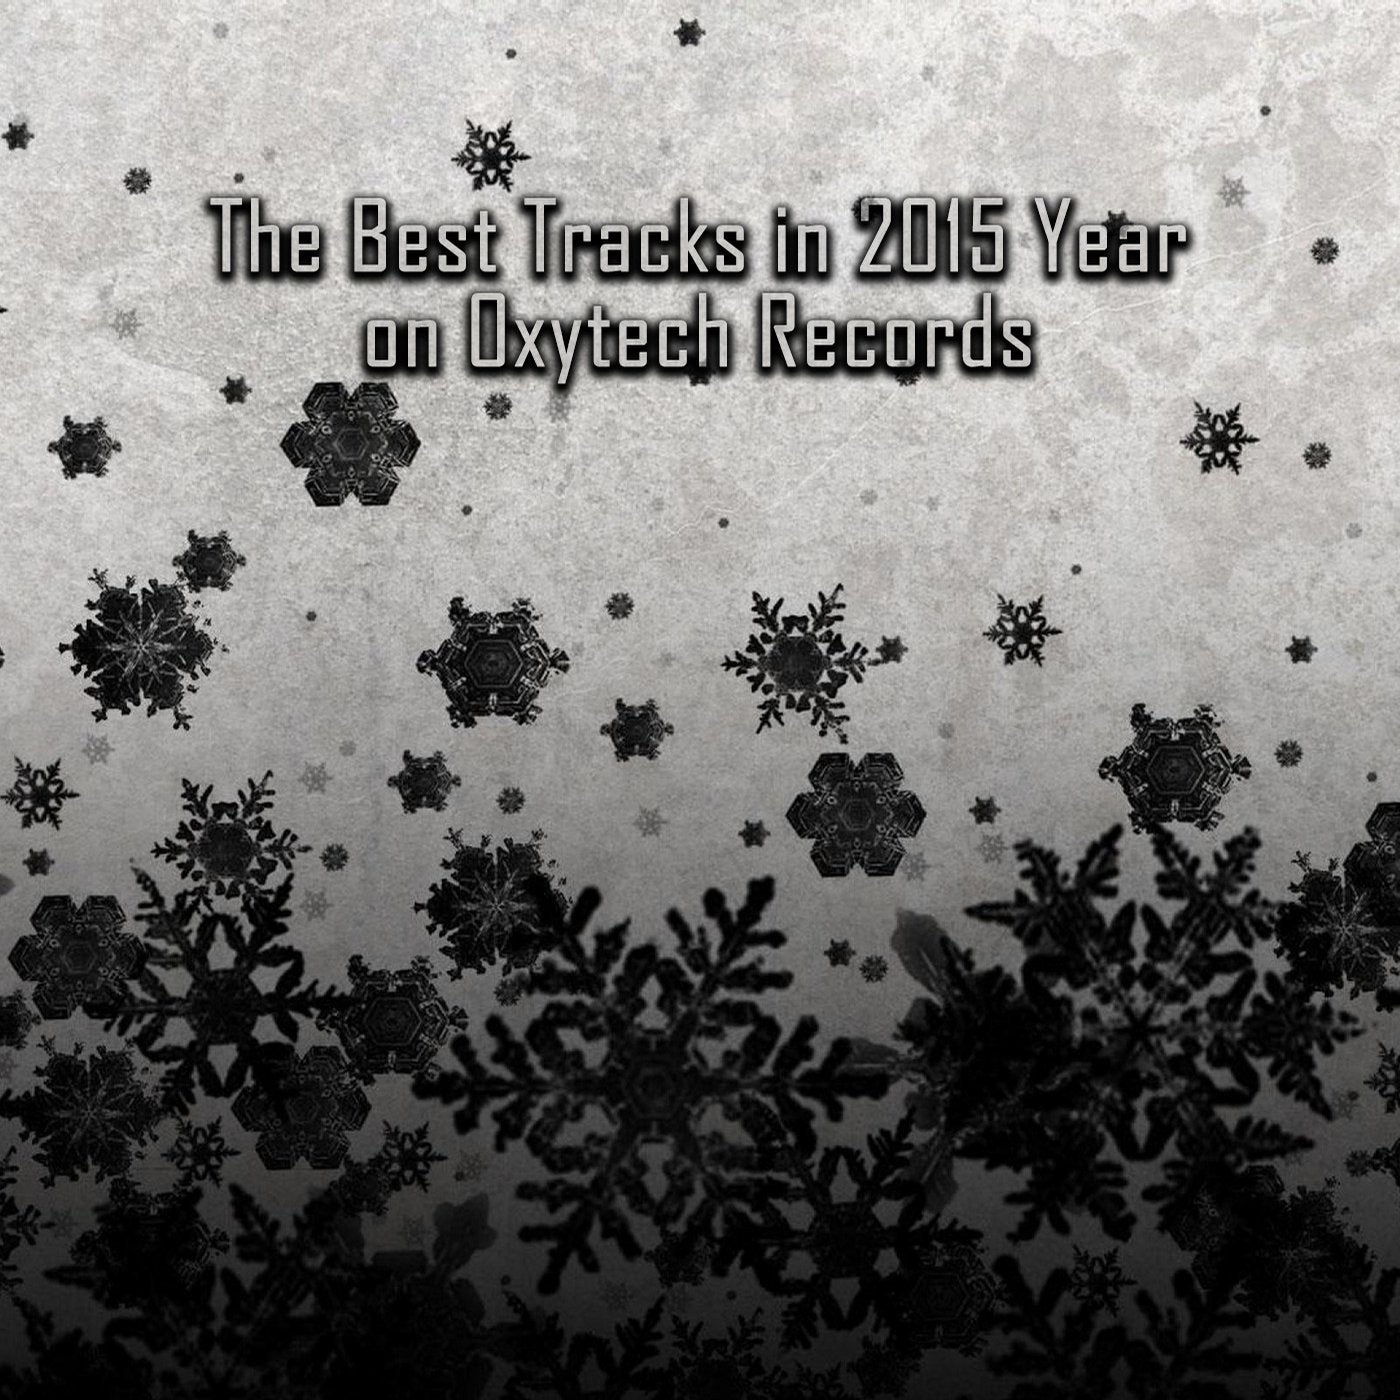 The Best Tracks in 2015 Year on Oxytech Records